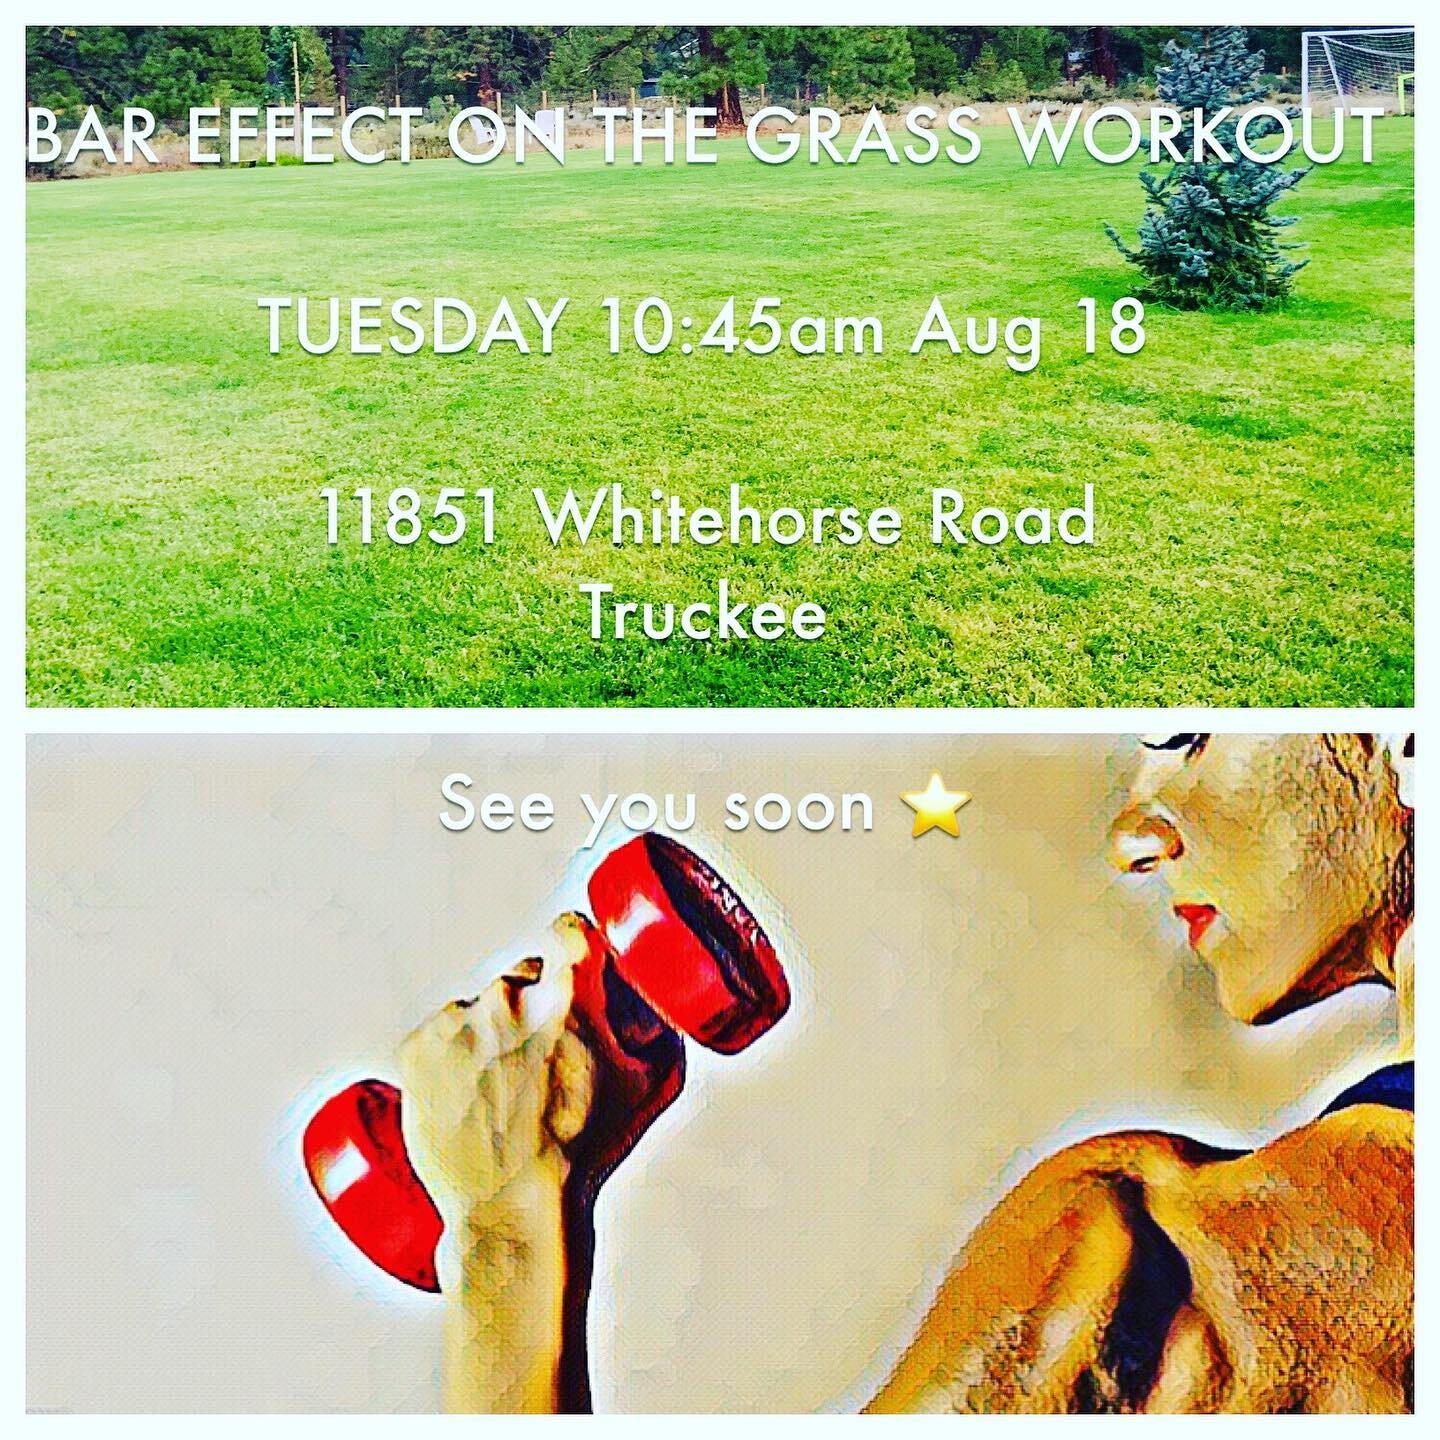 BAR EFFECT ON THE GRASS WORKOUT

TUESDAY 10:45am Aug 18

11851 Whitehorse Road 
Truckee 

See you soon ⭐️

Bring your MAT if not we have plenty